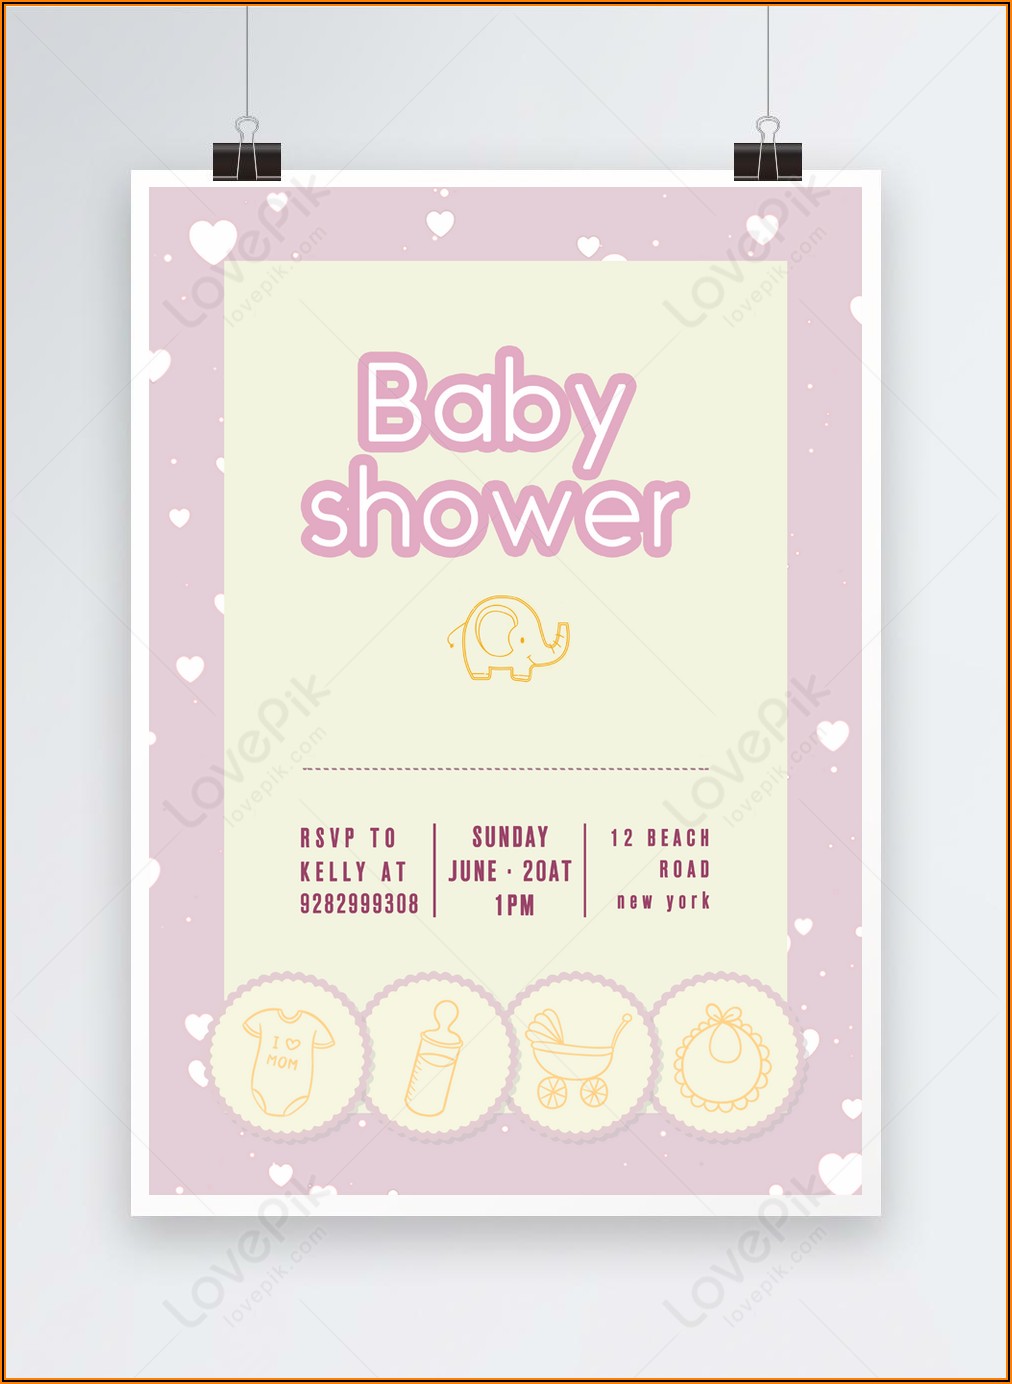 Baby Shower Invitation Template Download